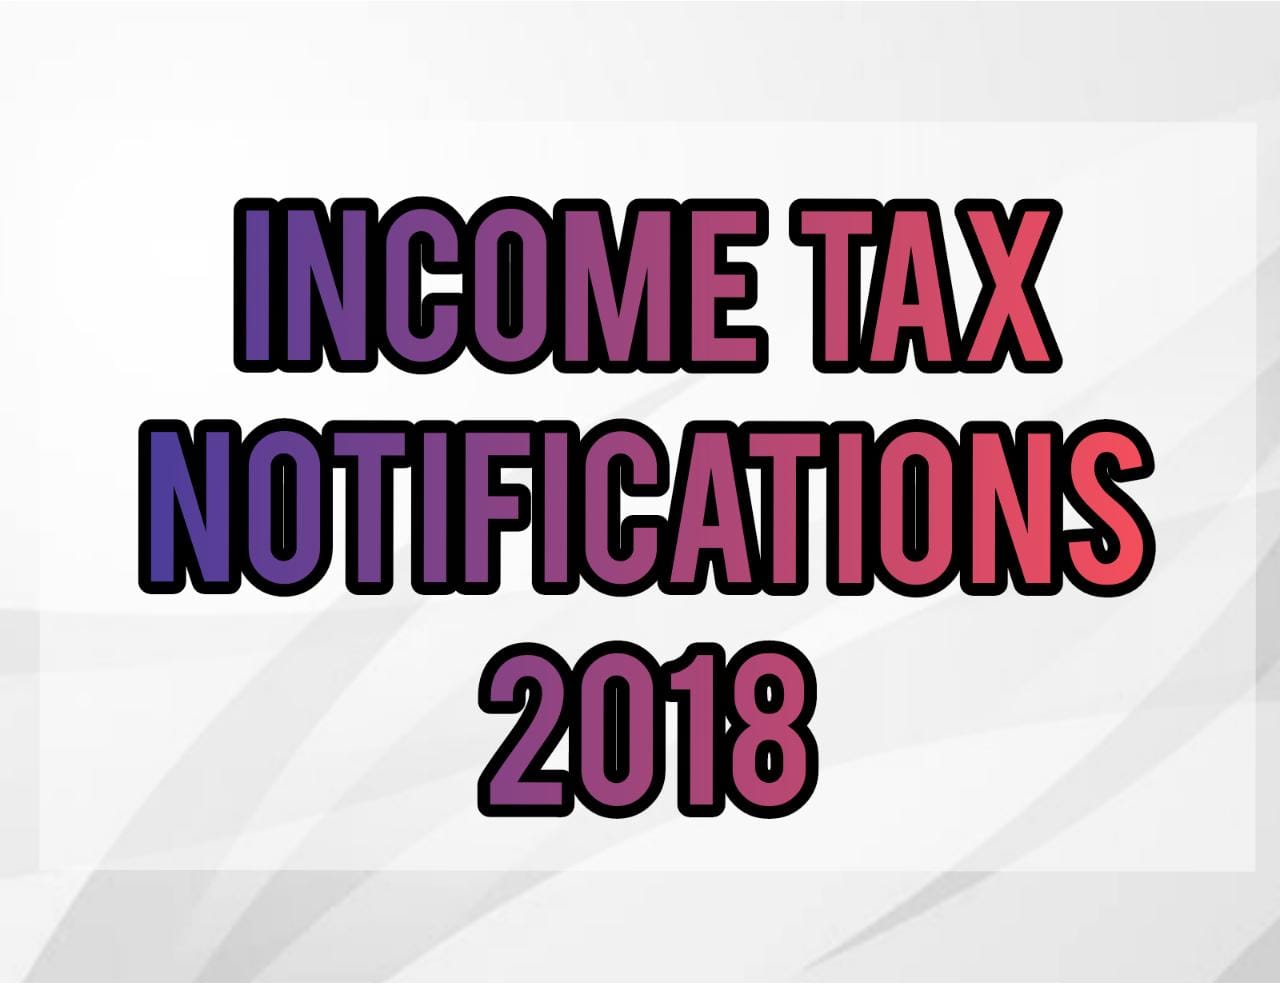 Income Tax notification for 2018